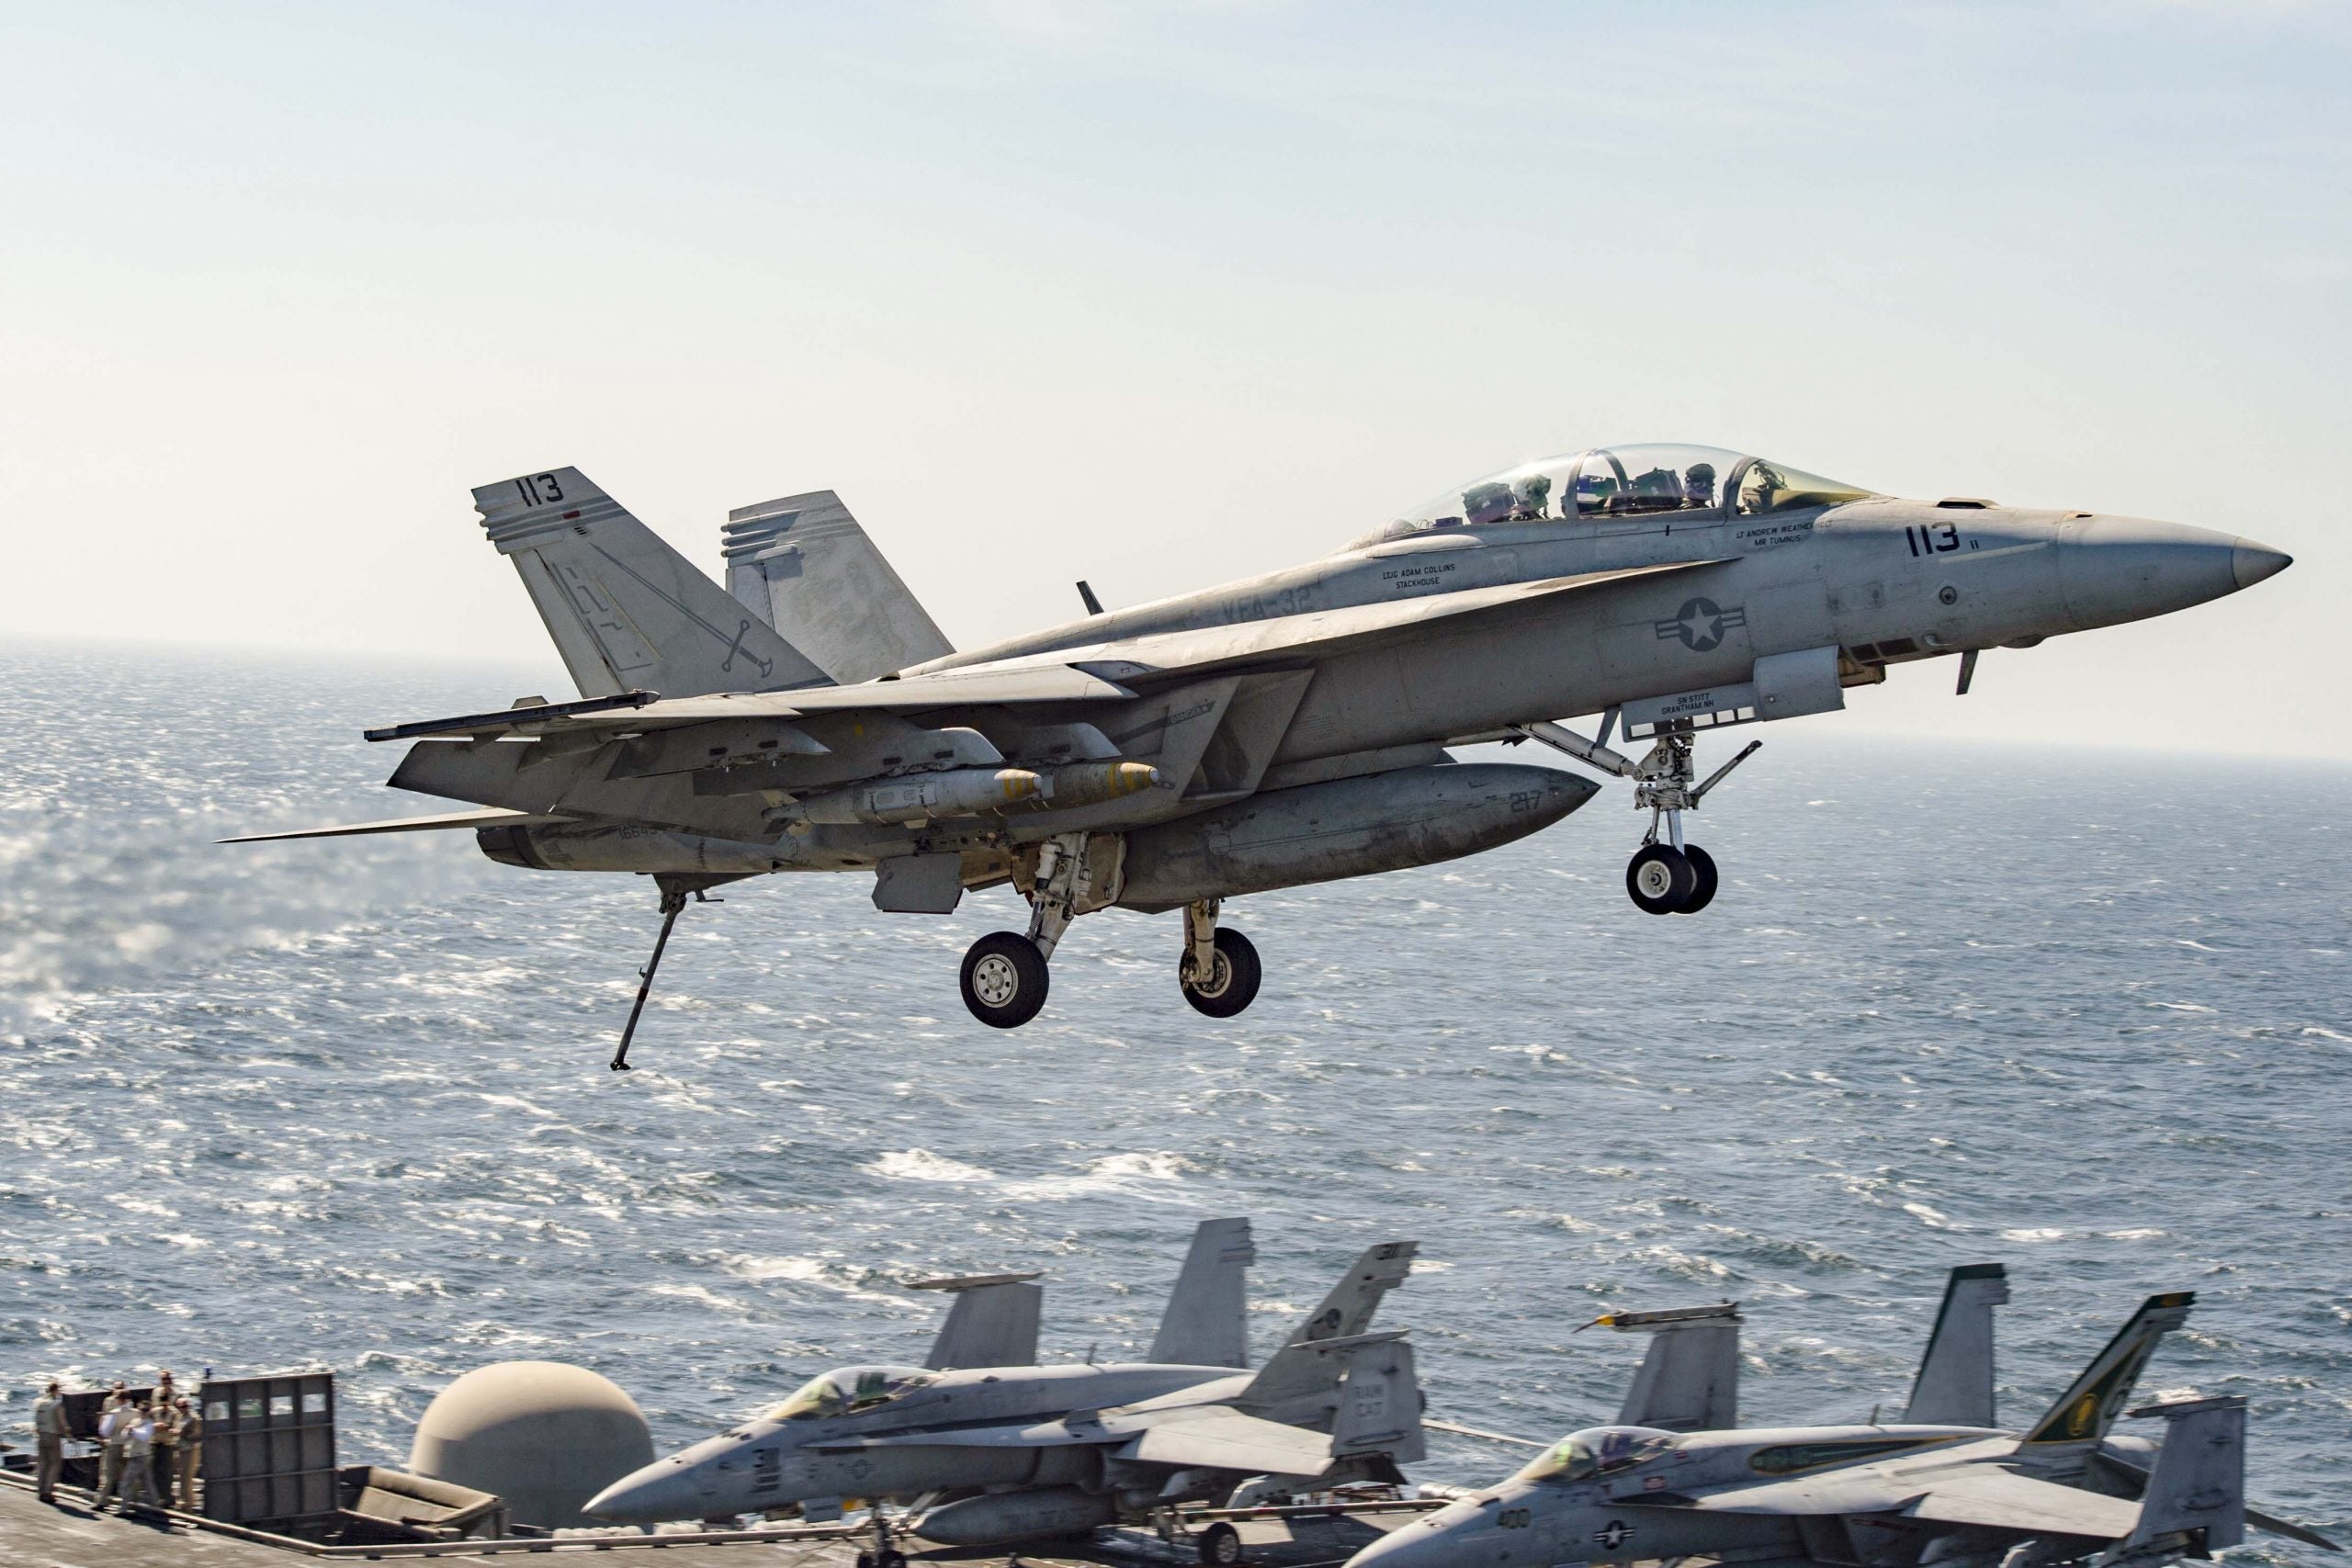 Naval Flight Mishaps On The Rise